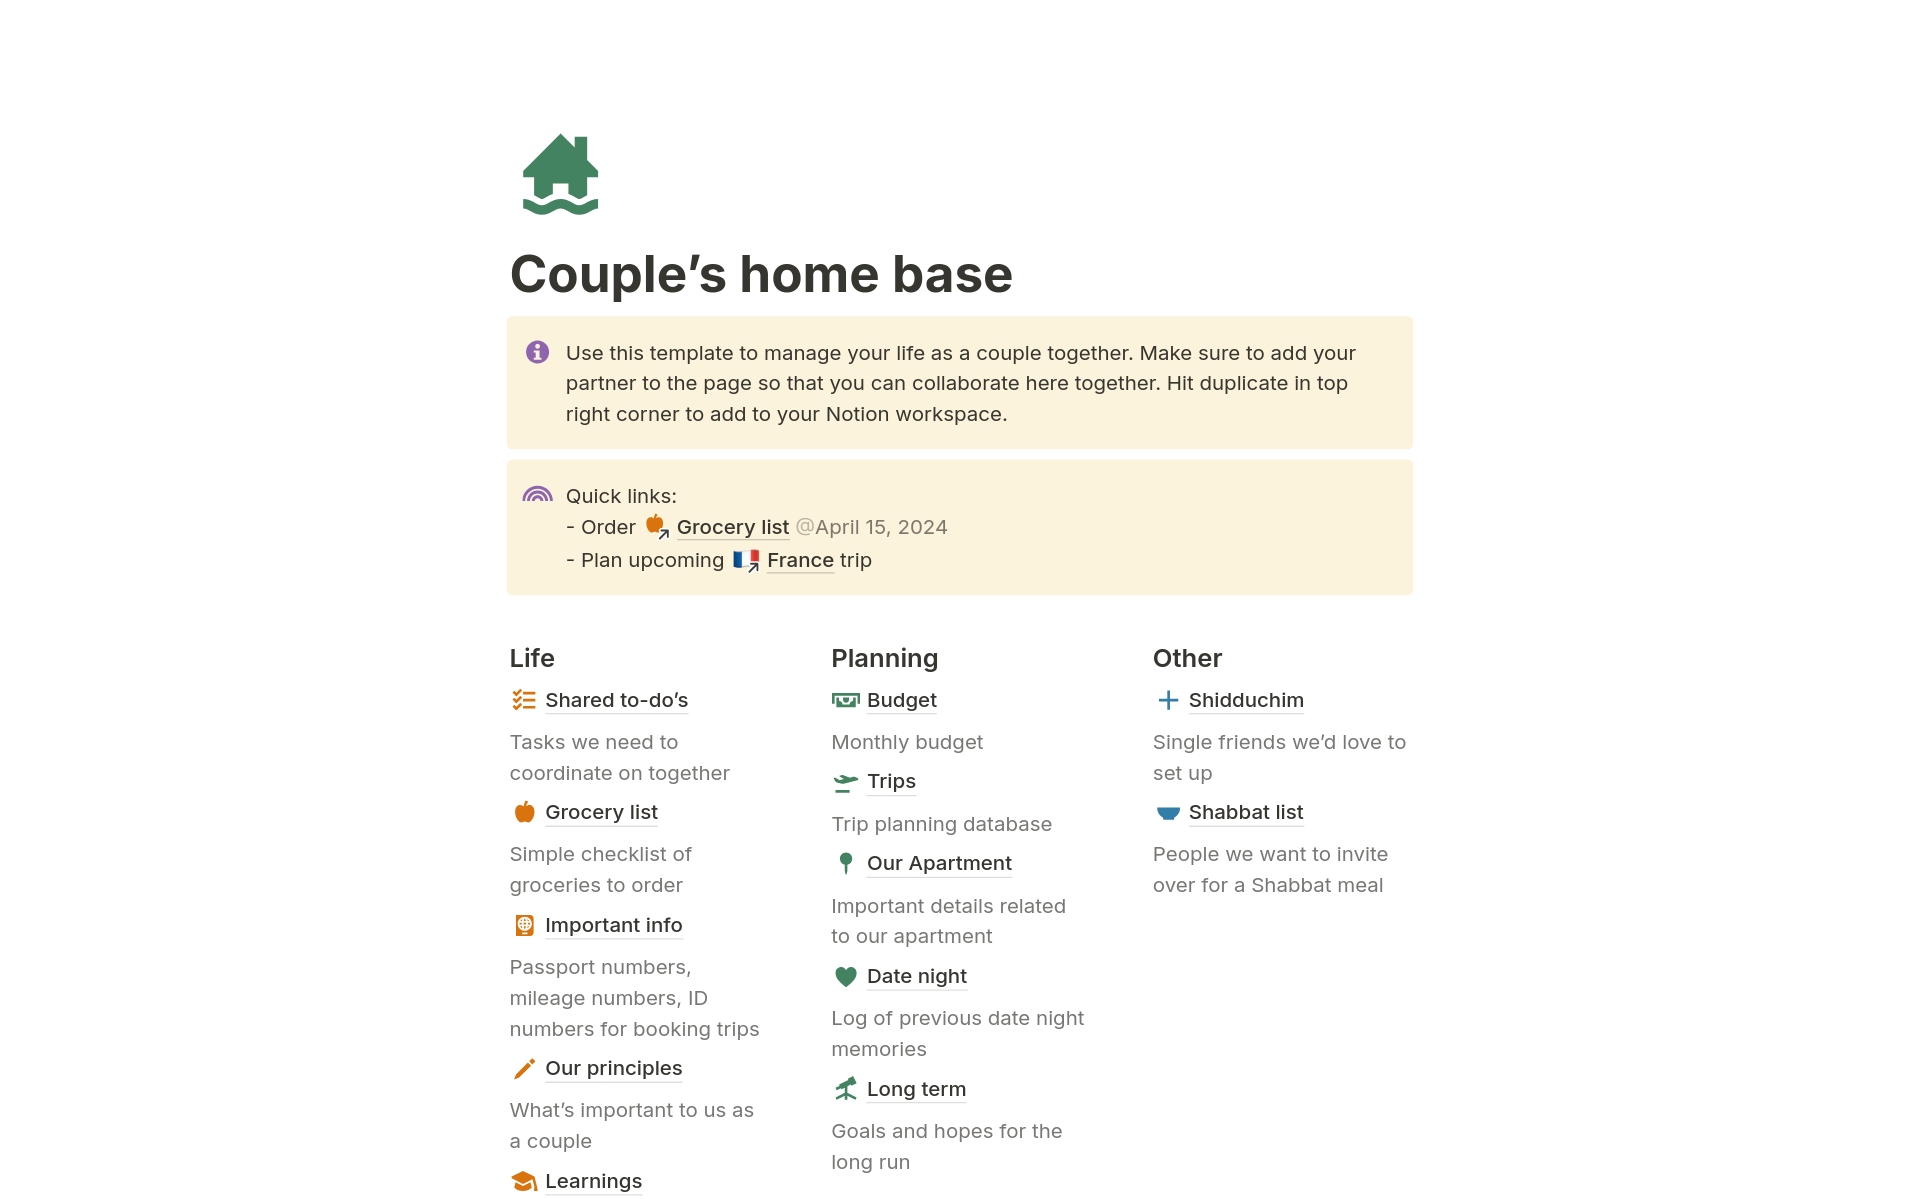 Use this template to manage your life as a couple together.